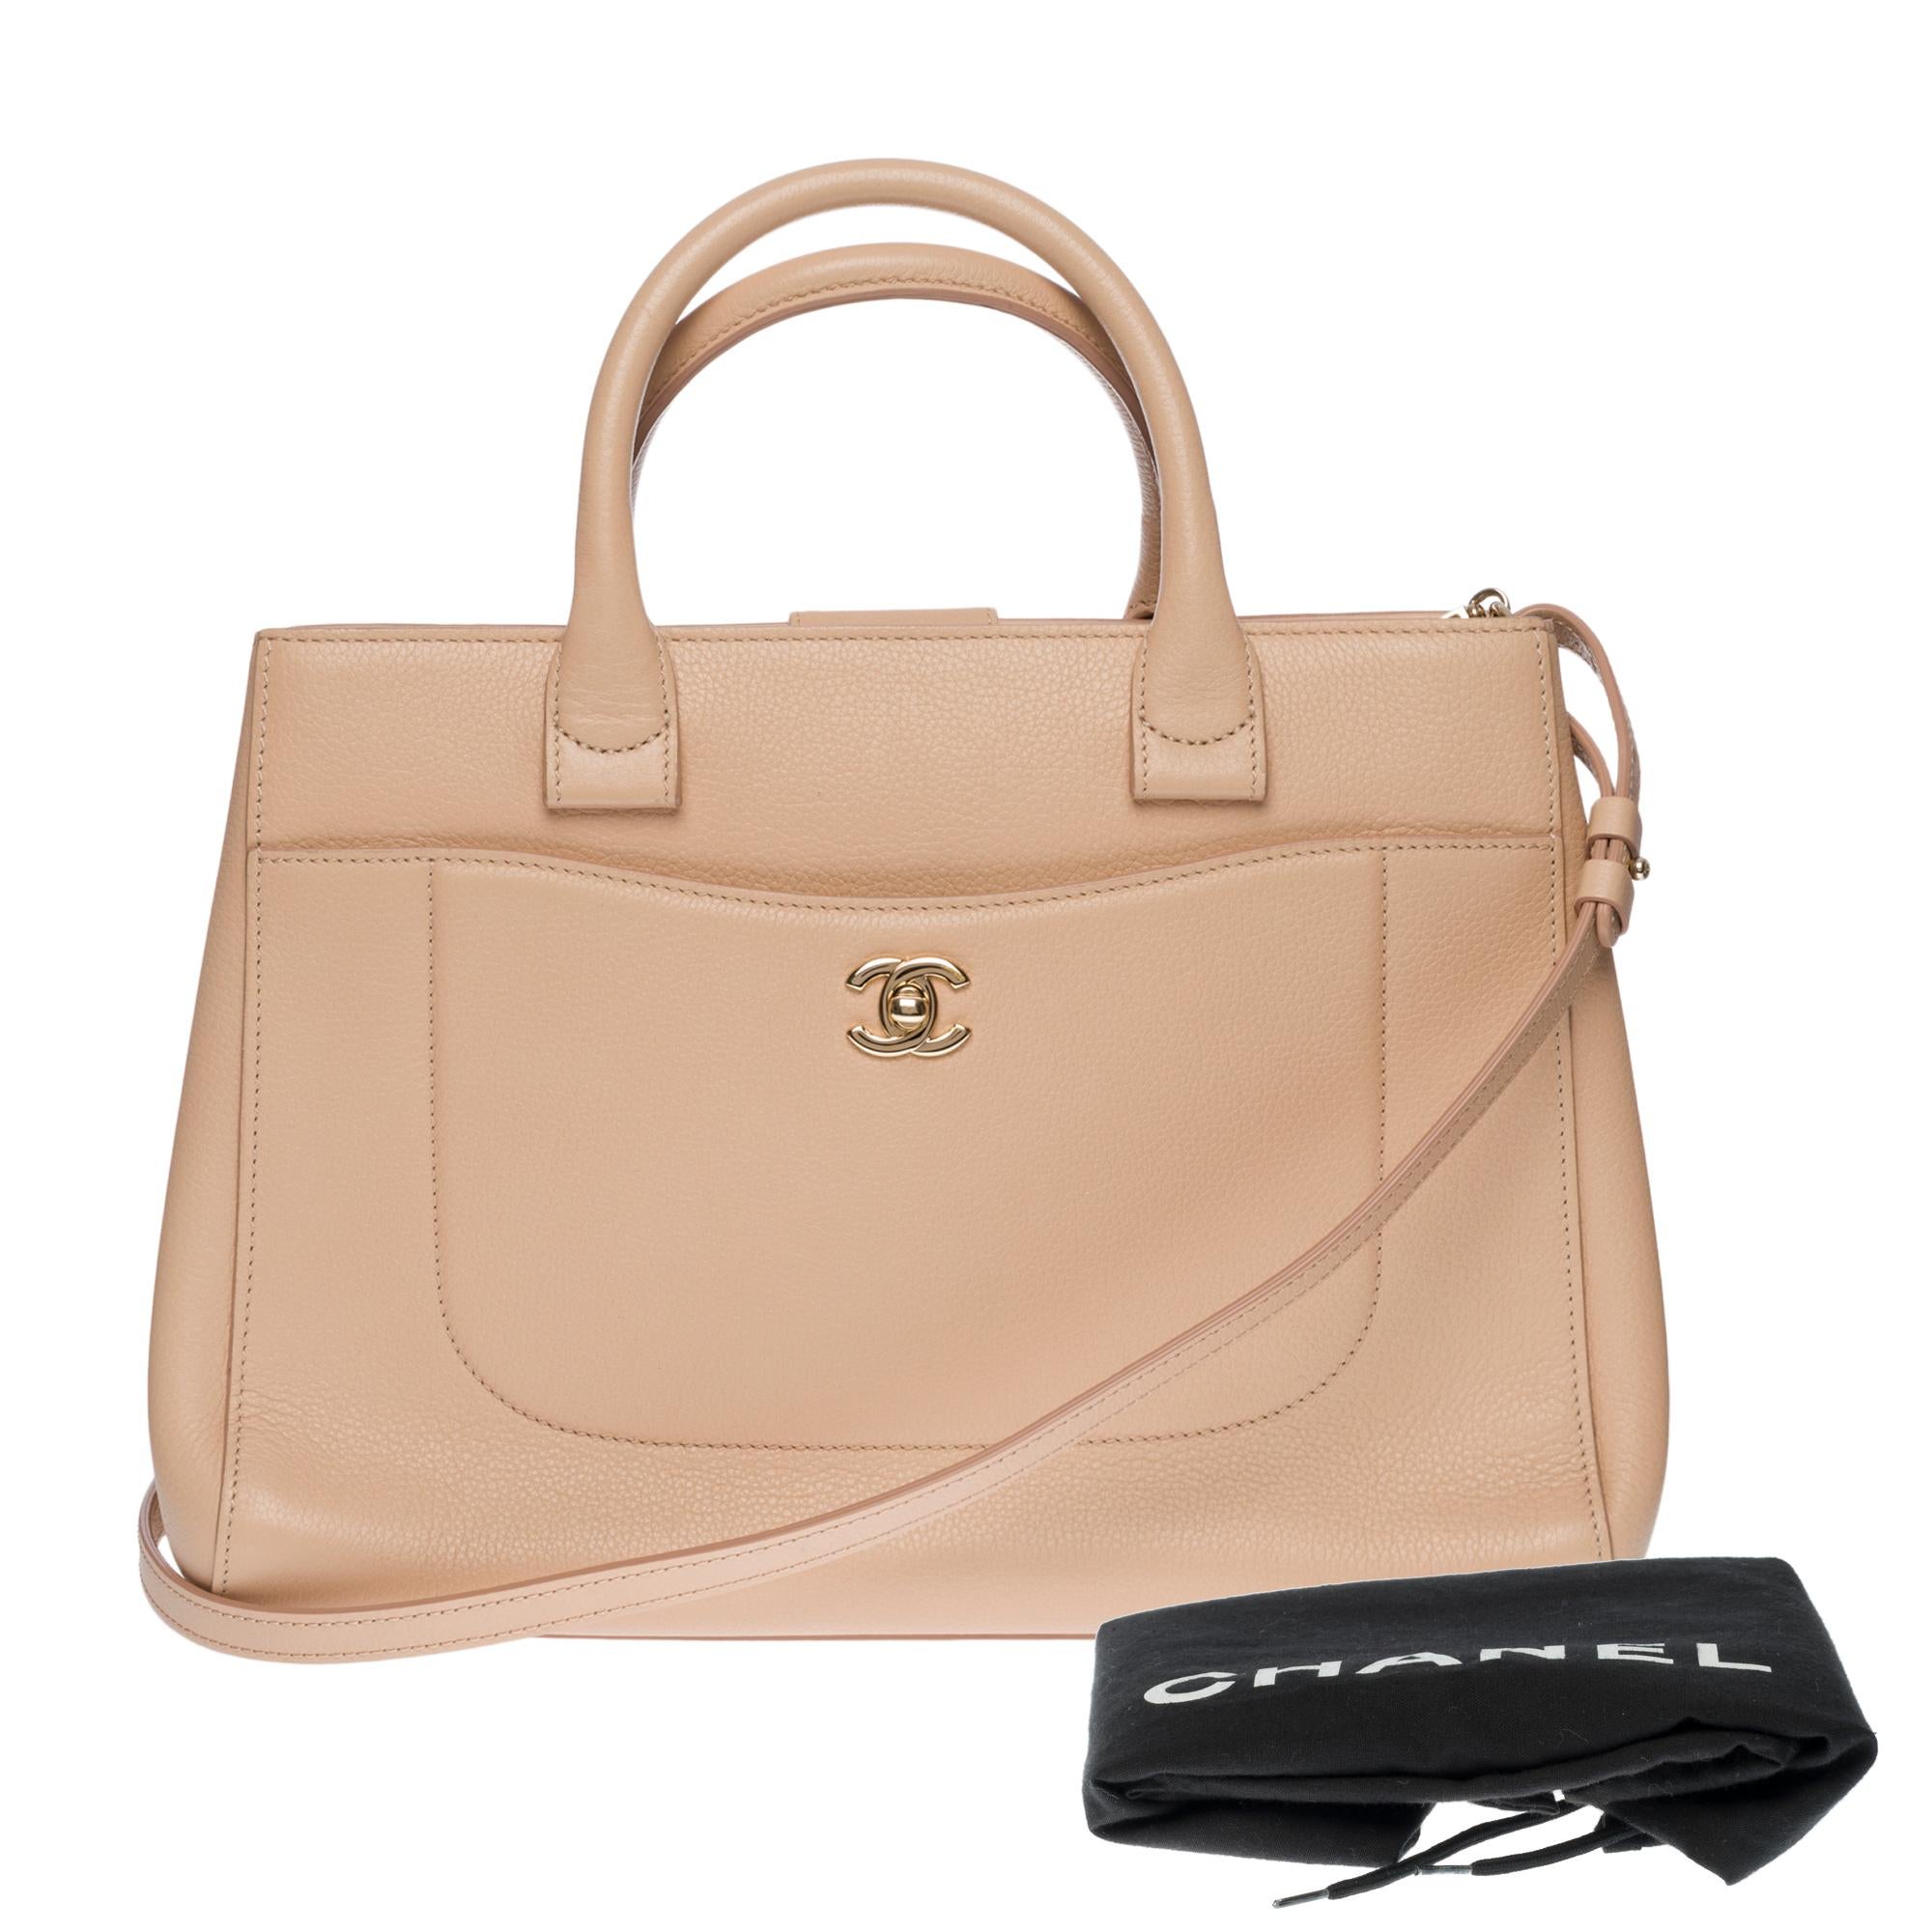 Chanel Neo Executive Tote bag with shoulder strap in Pink grained leather, GHW 4